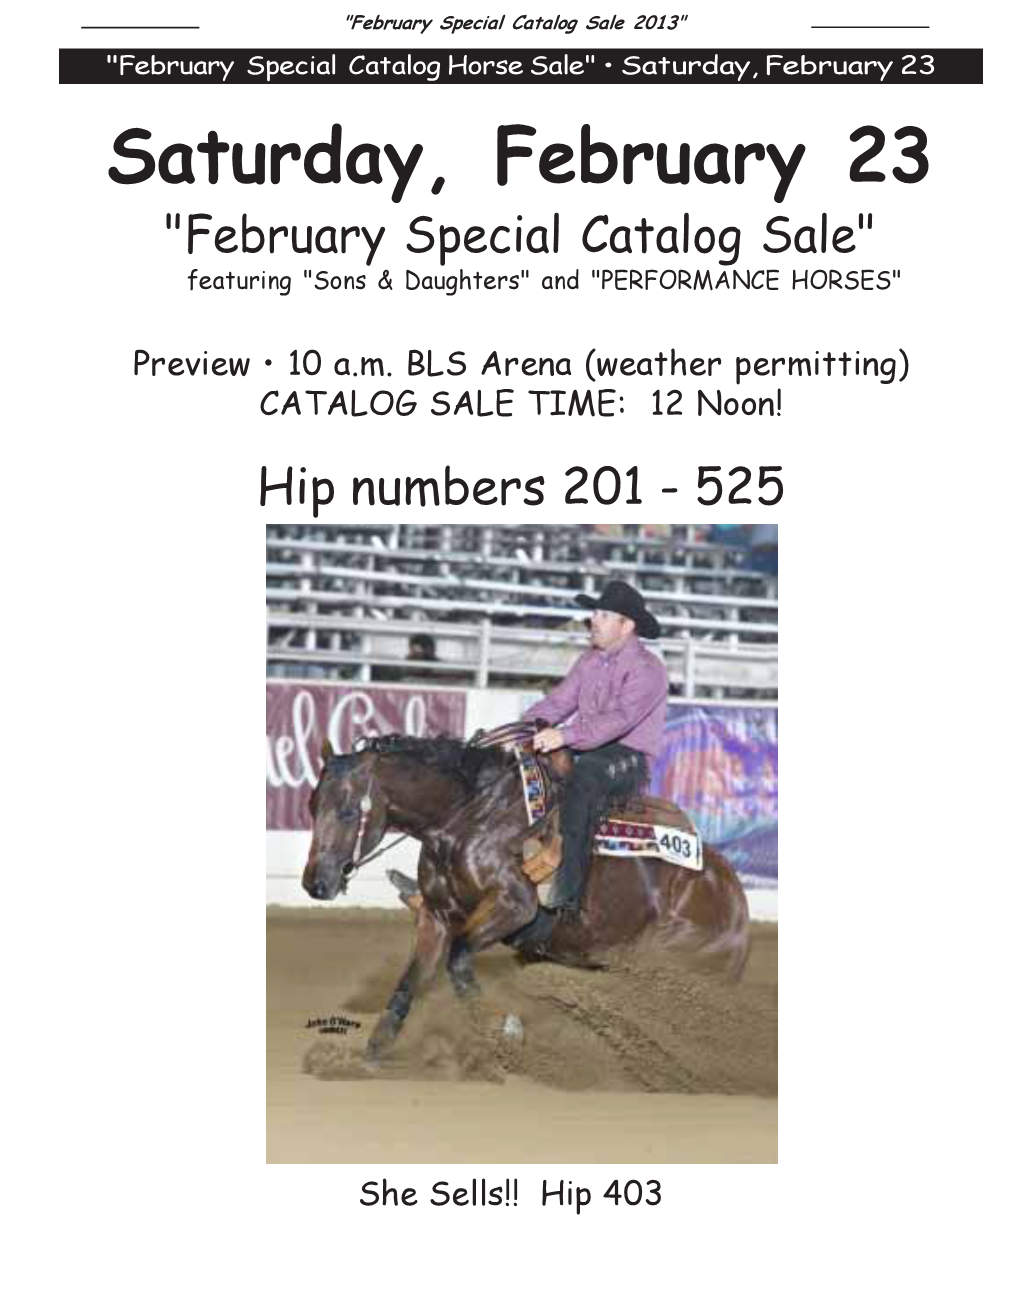 Saturday, February 23 Saturday, February 23 "February Special Catalog Sale" Featuring "Sons & Daughters" and "PERFORMANCE HORSES"